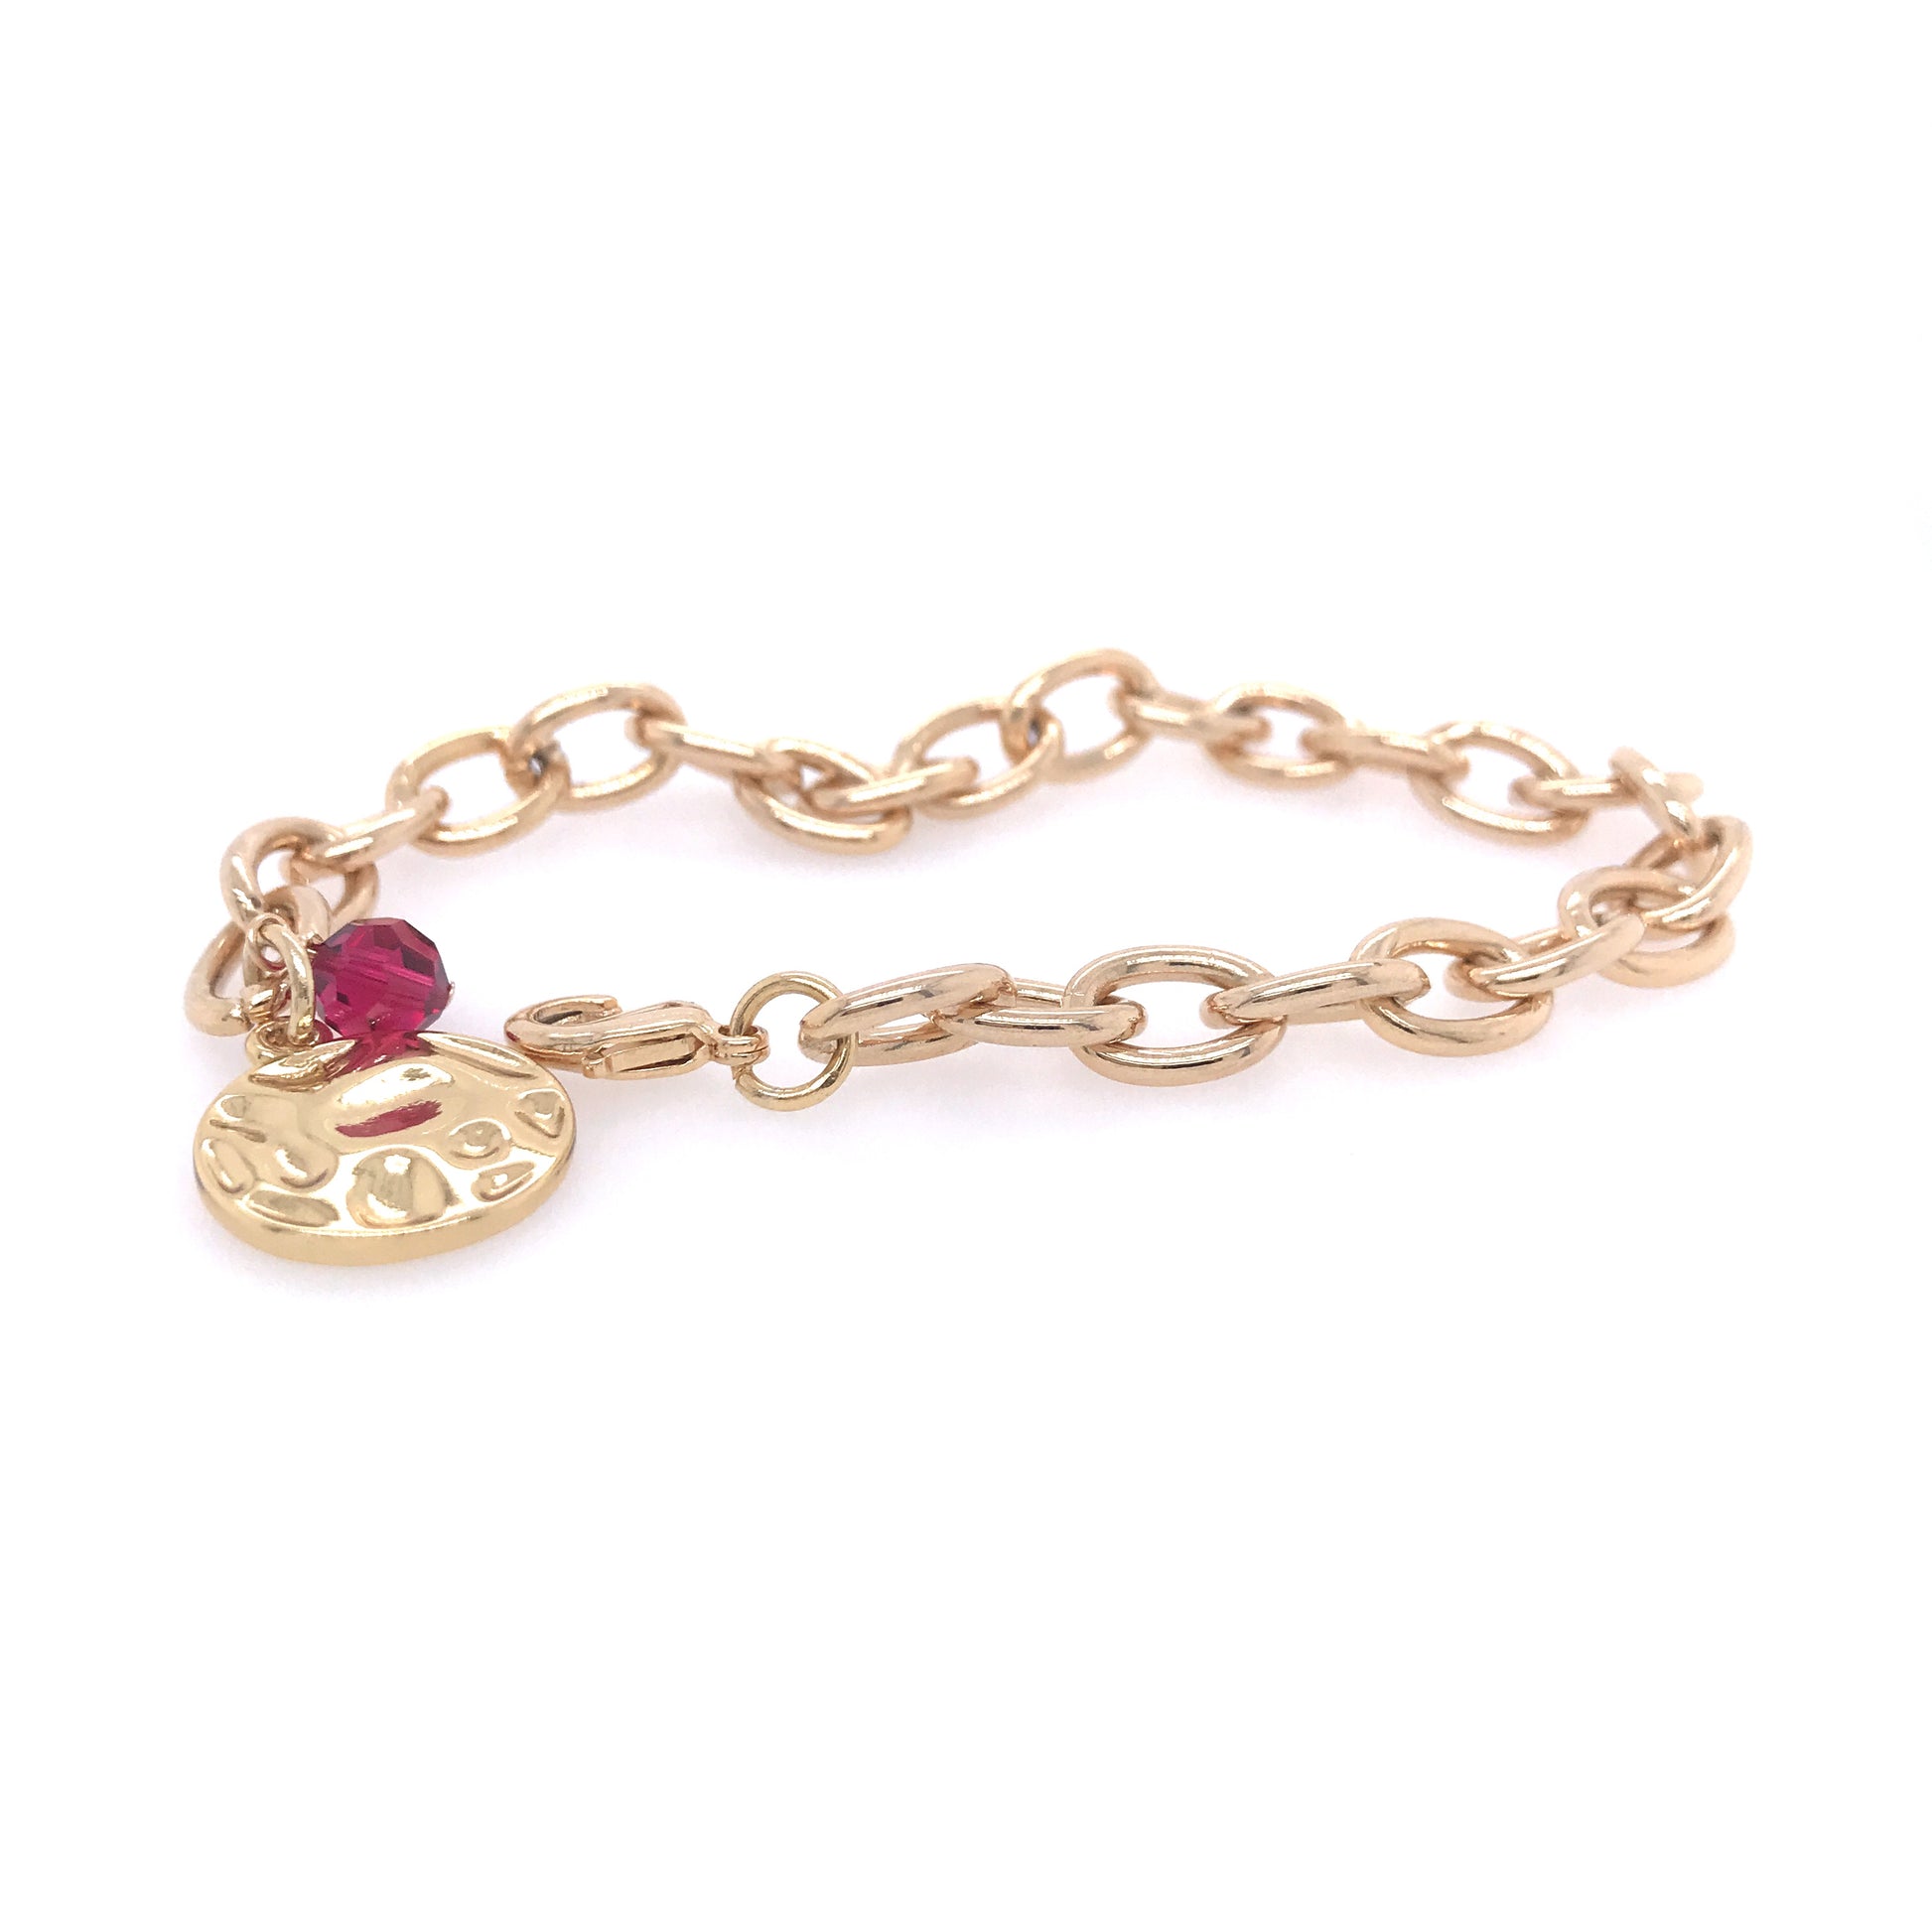 Gold Chain Bracelet With Coin Charm And Ruby Crystal - HK Jewels